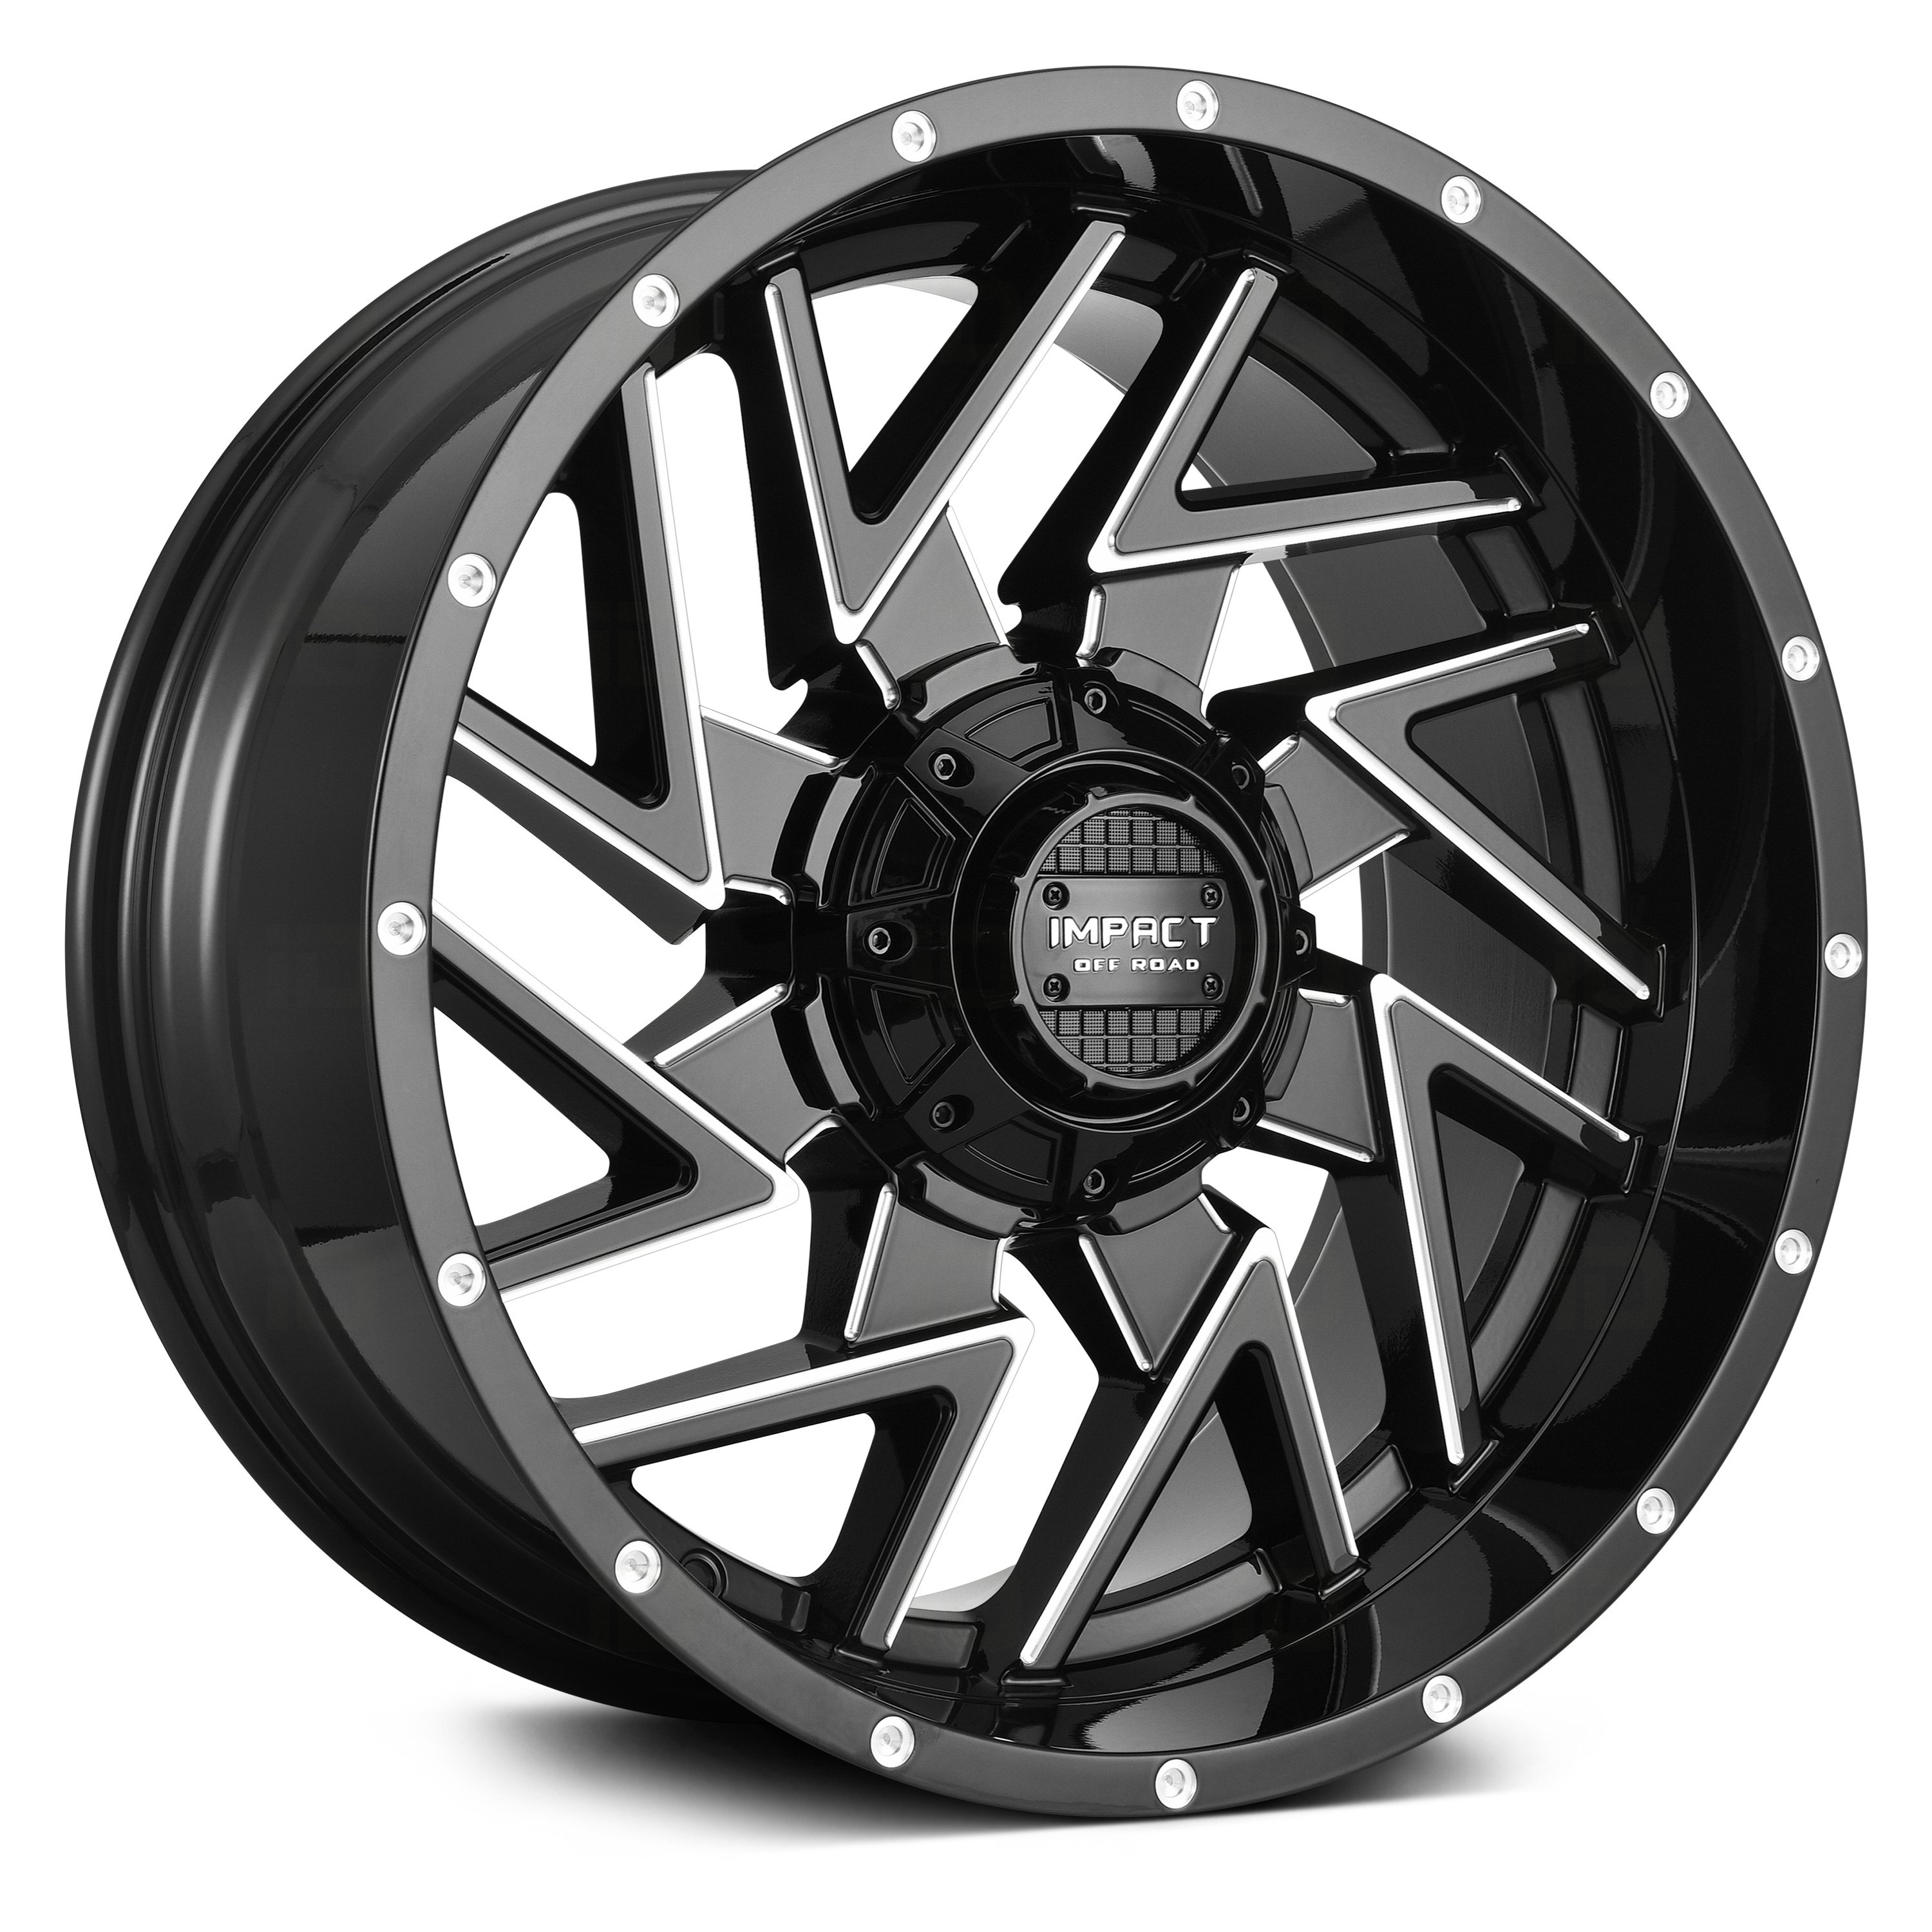 IMPACT OFF ROAD® 809 Wheels - Gloss Black with Milled Accents Rims